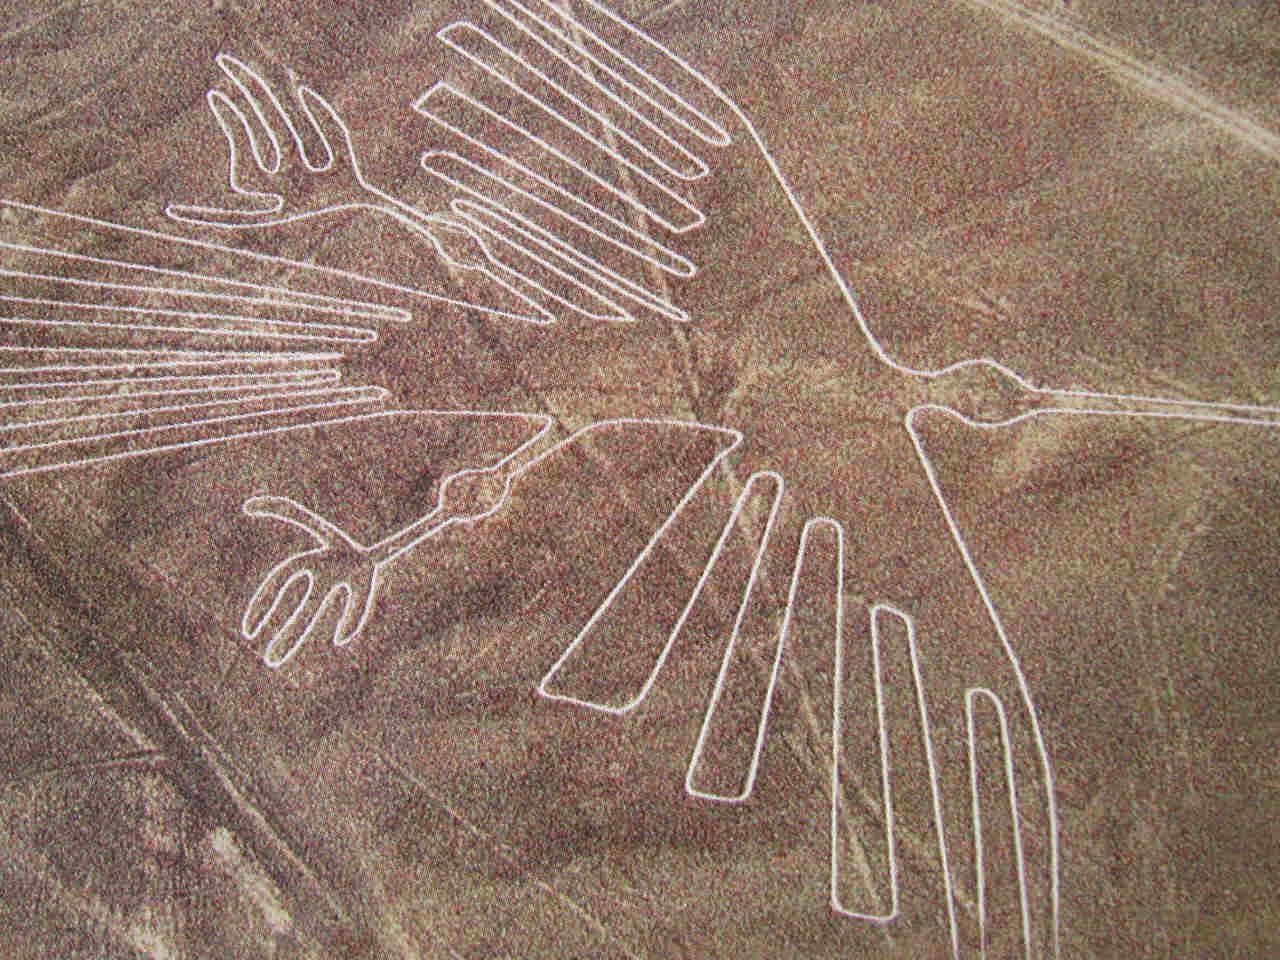 Flight over the Nazca Lines. Full day tour from Lima